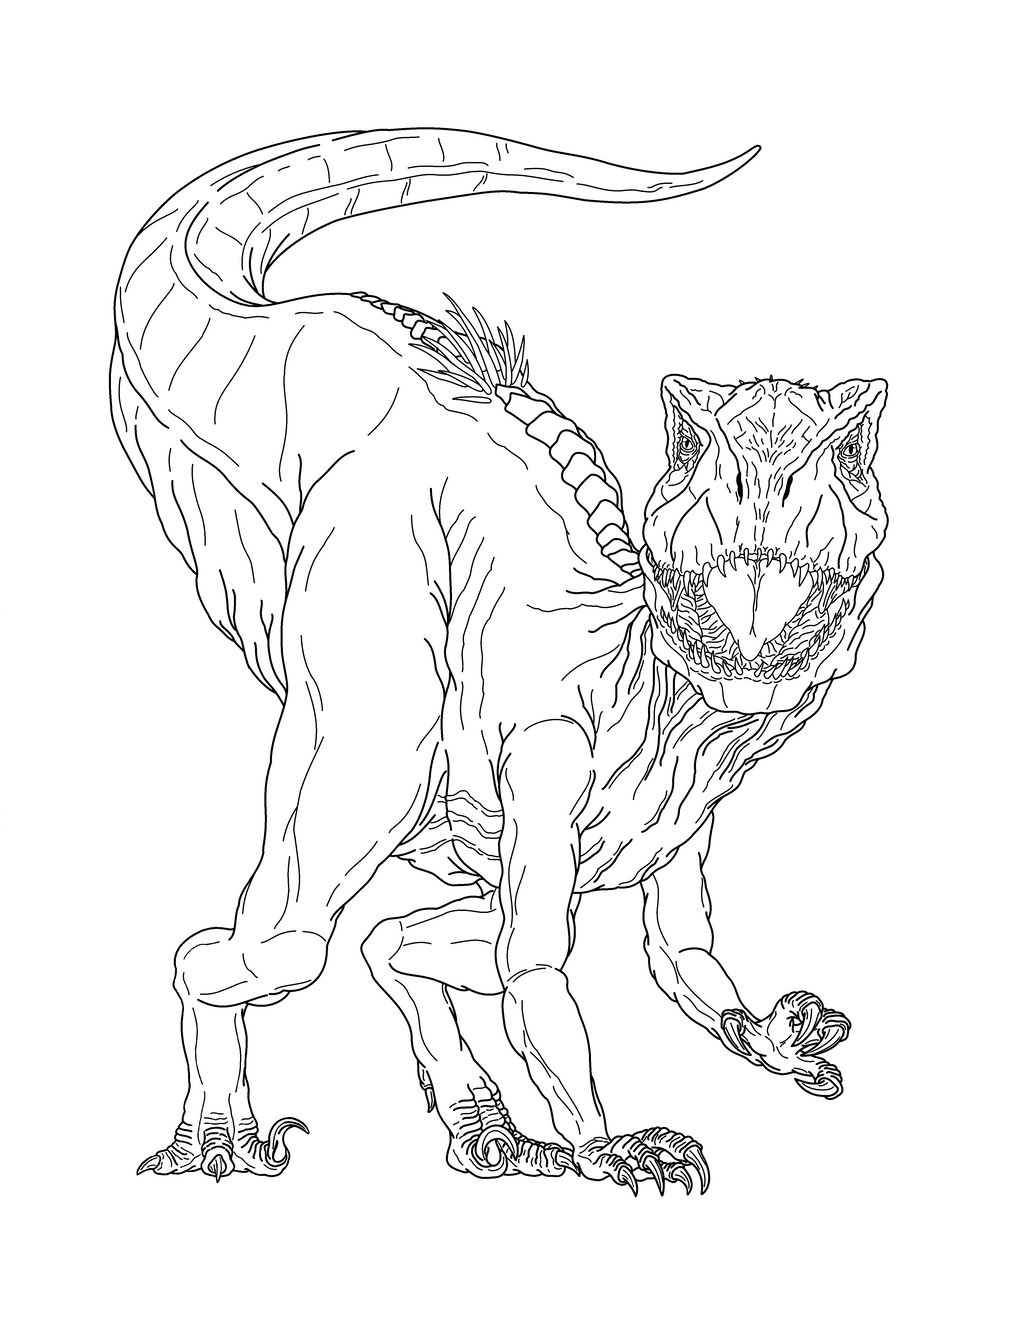 Indoraptor coloring picture by jurassicworldfan on